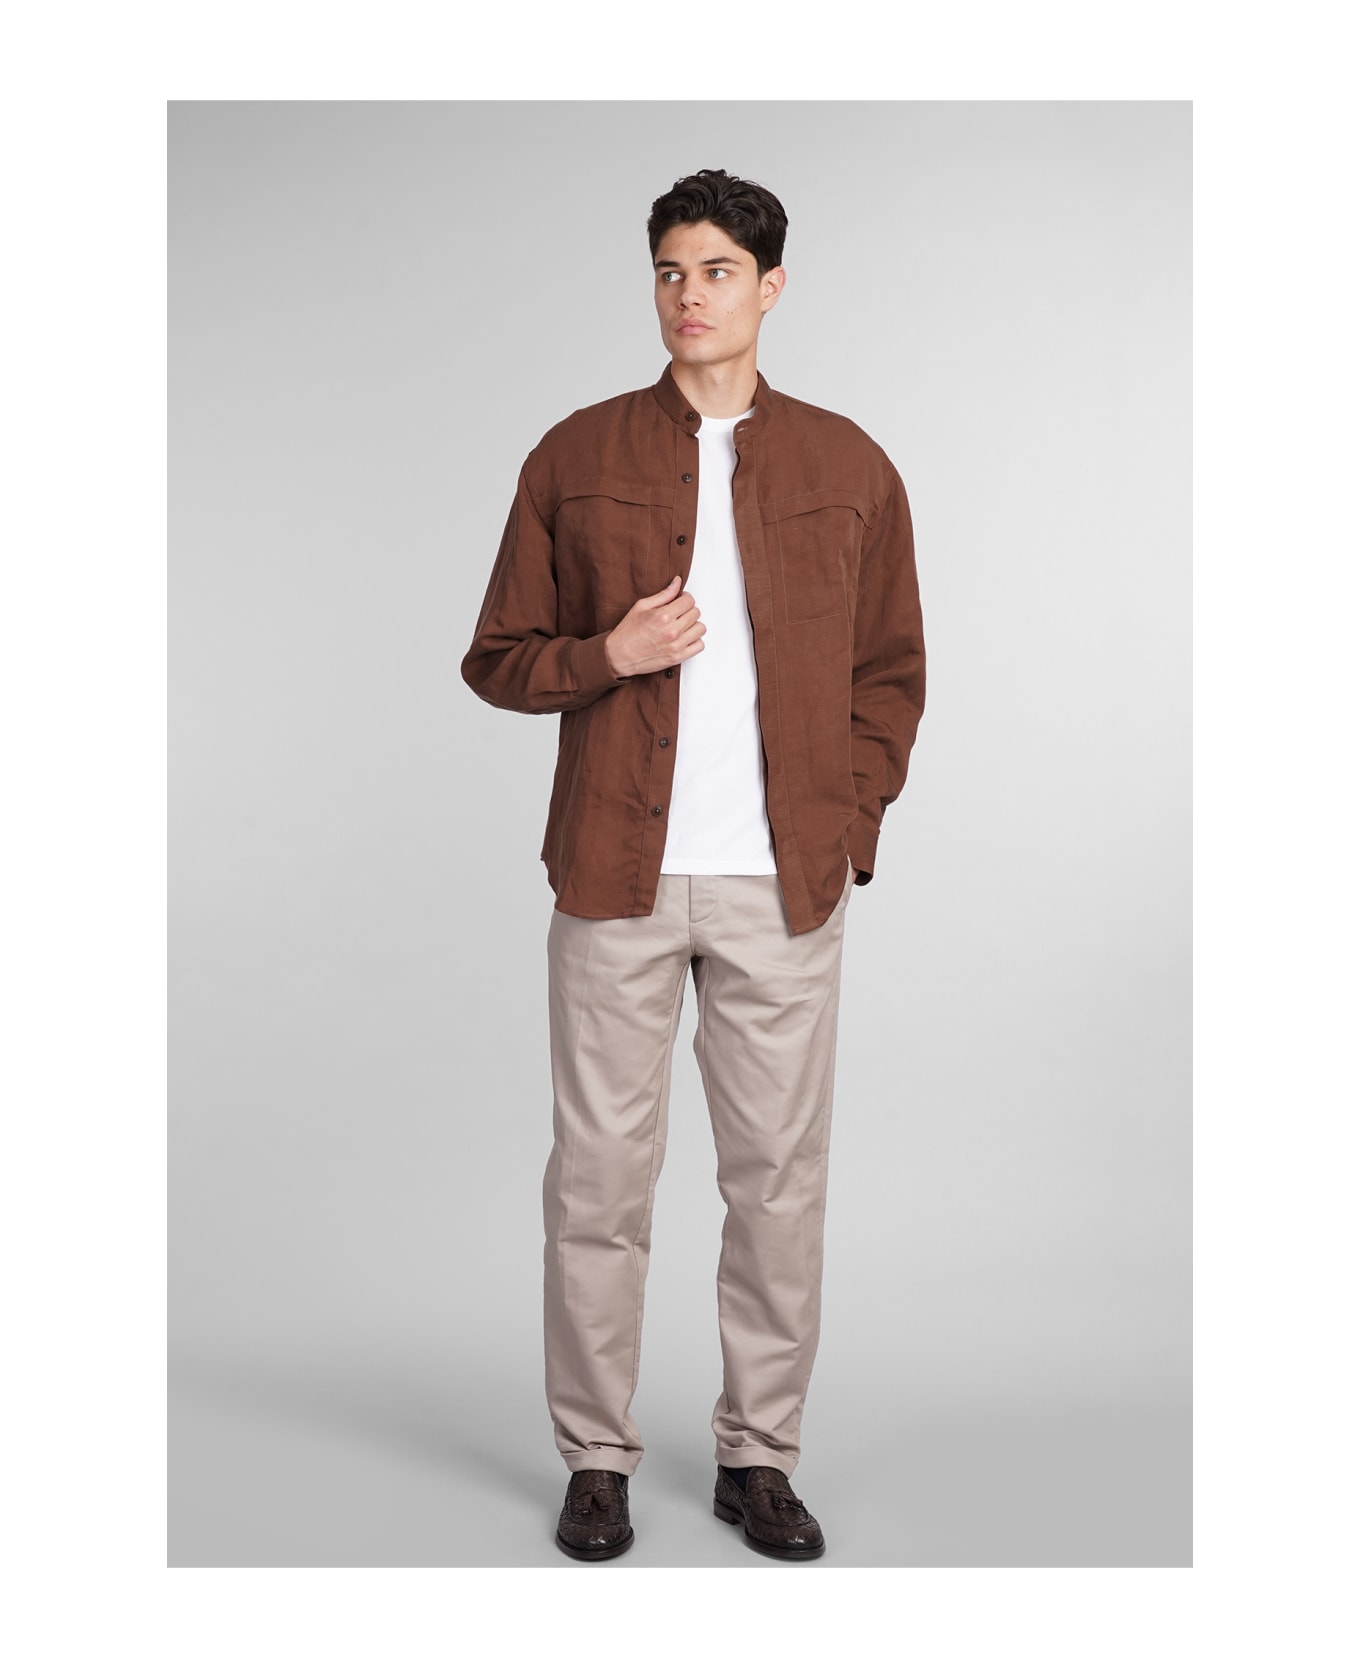 costumein Mattia Shirt In Brown Wool And Polyester - brown